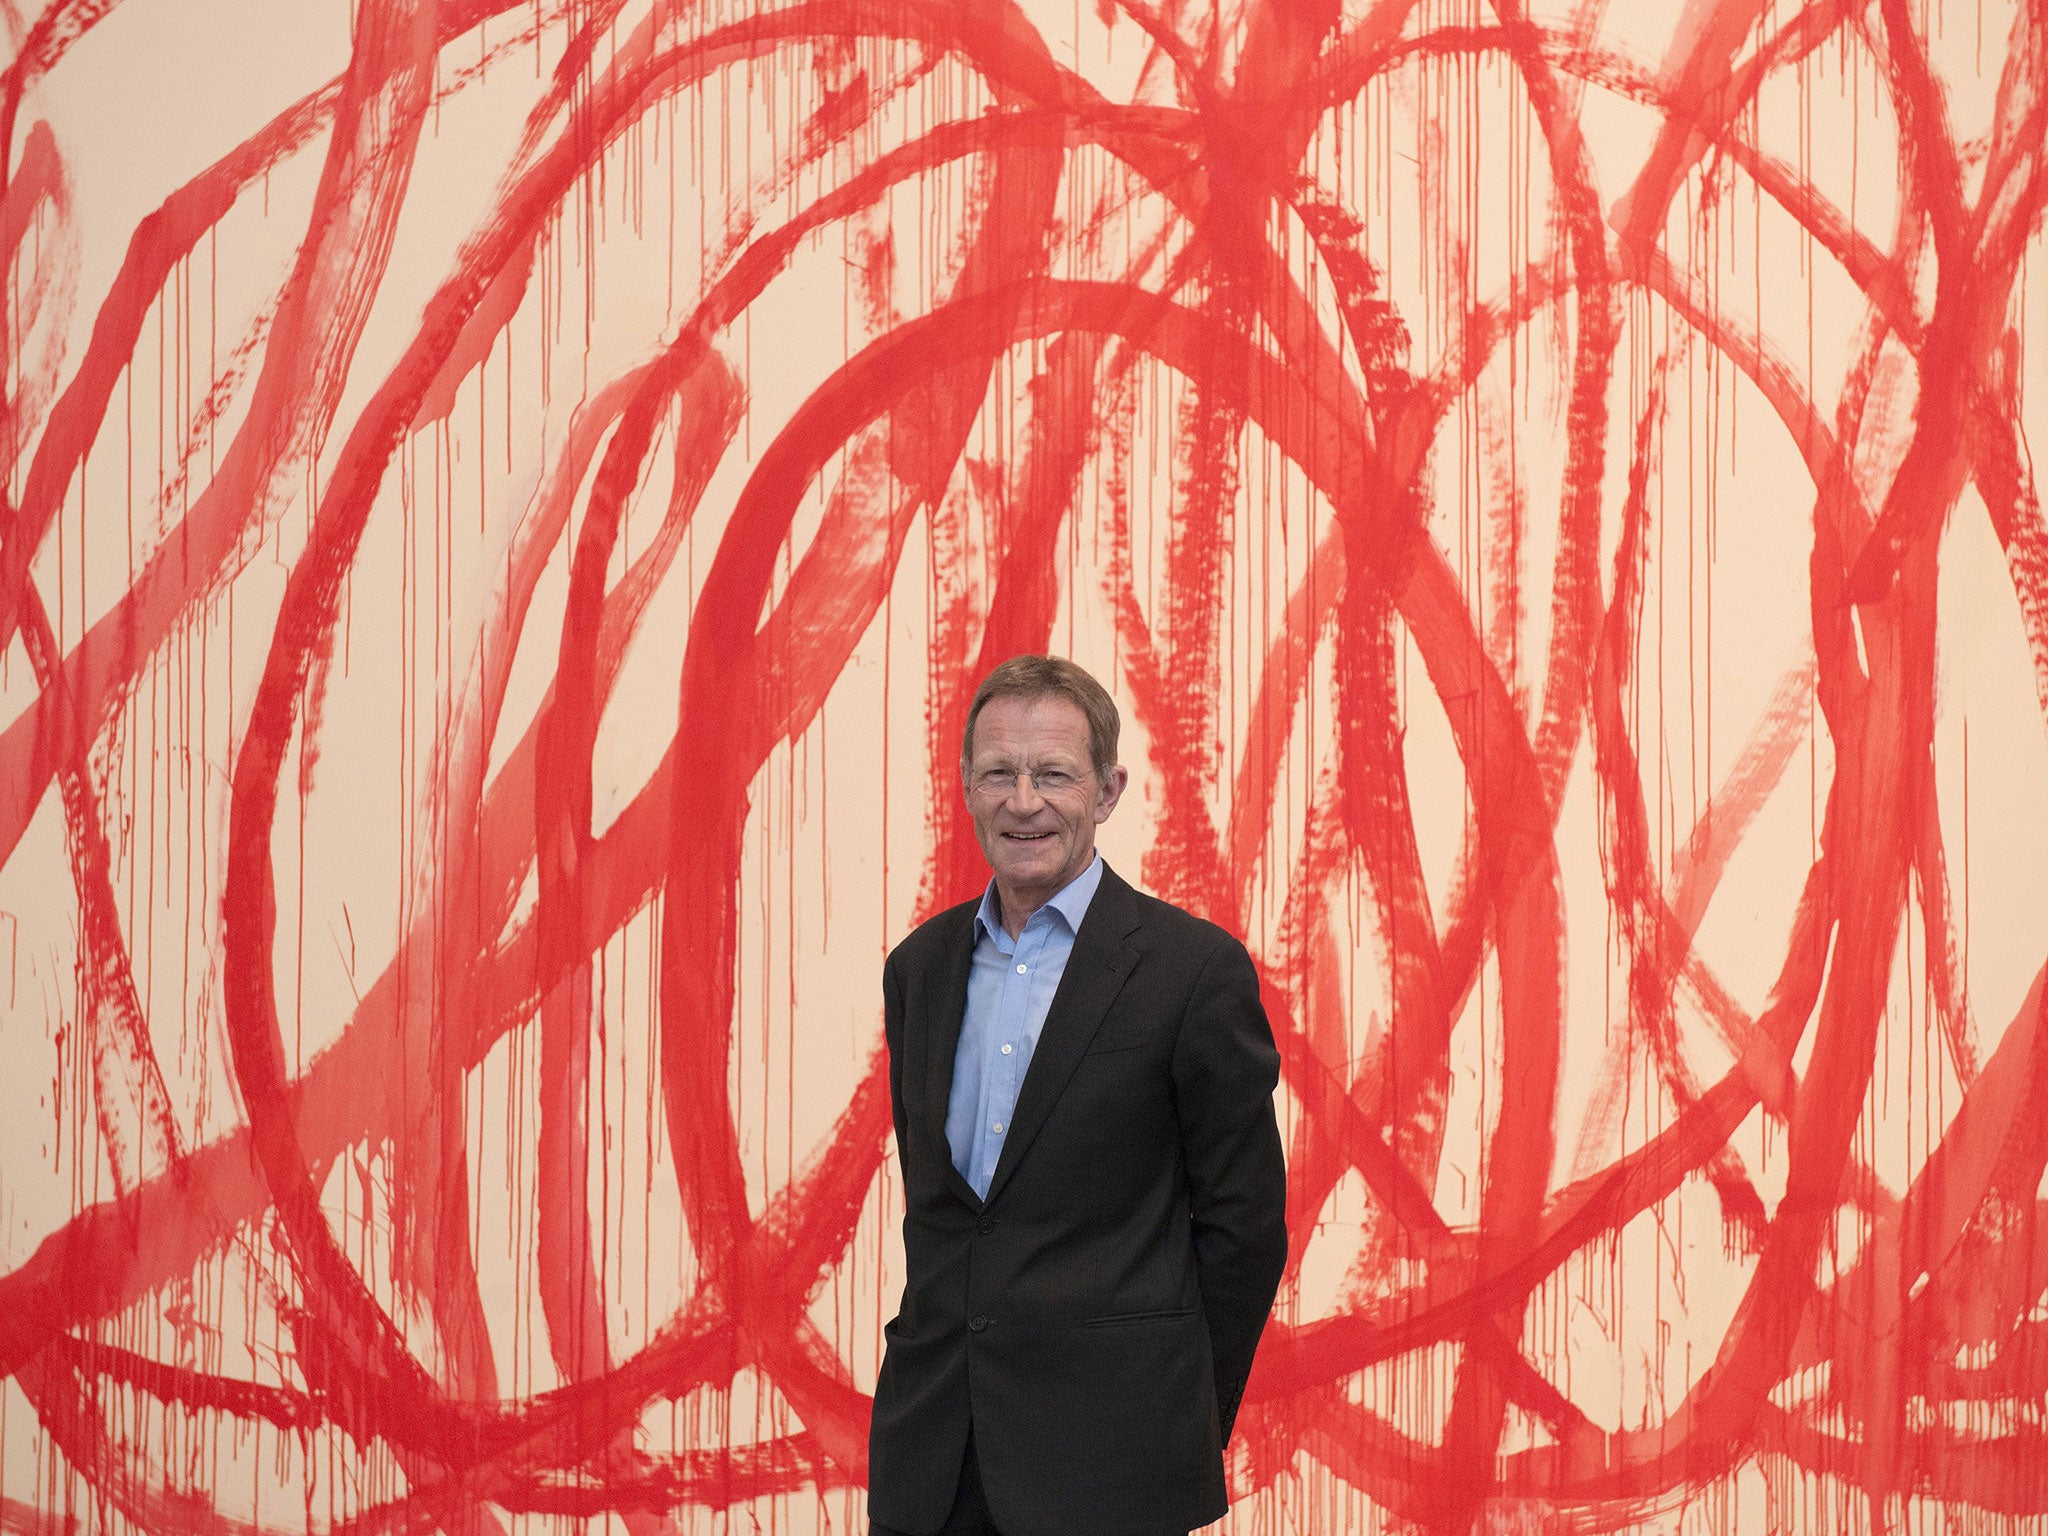 Director of Tate Sir Nicholas Serota called it "one of the most generous gifts ever to Tate by an artist"